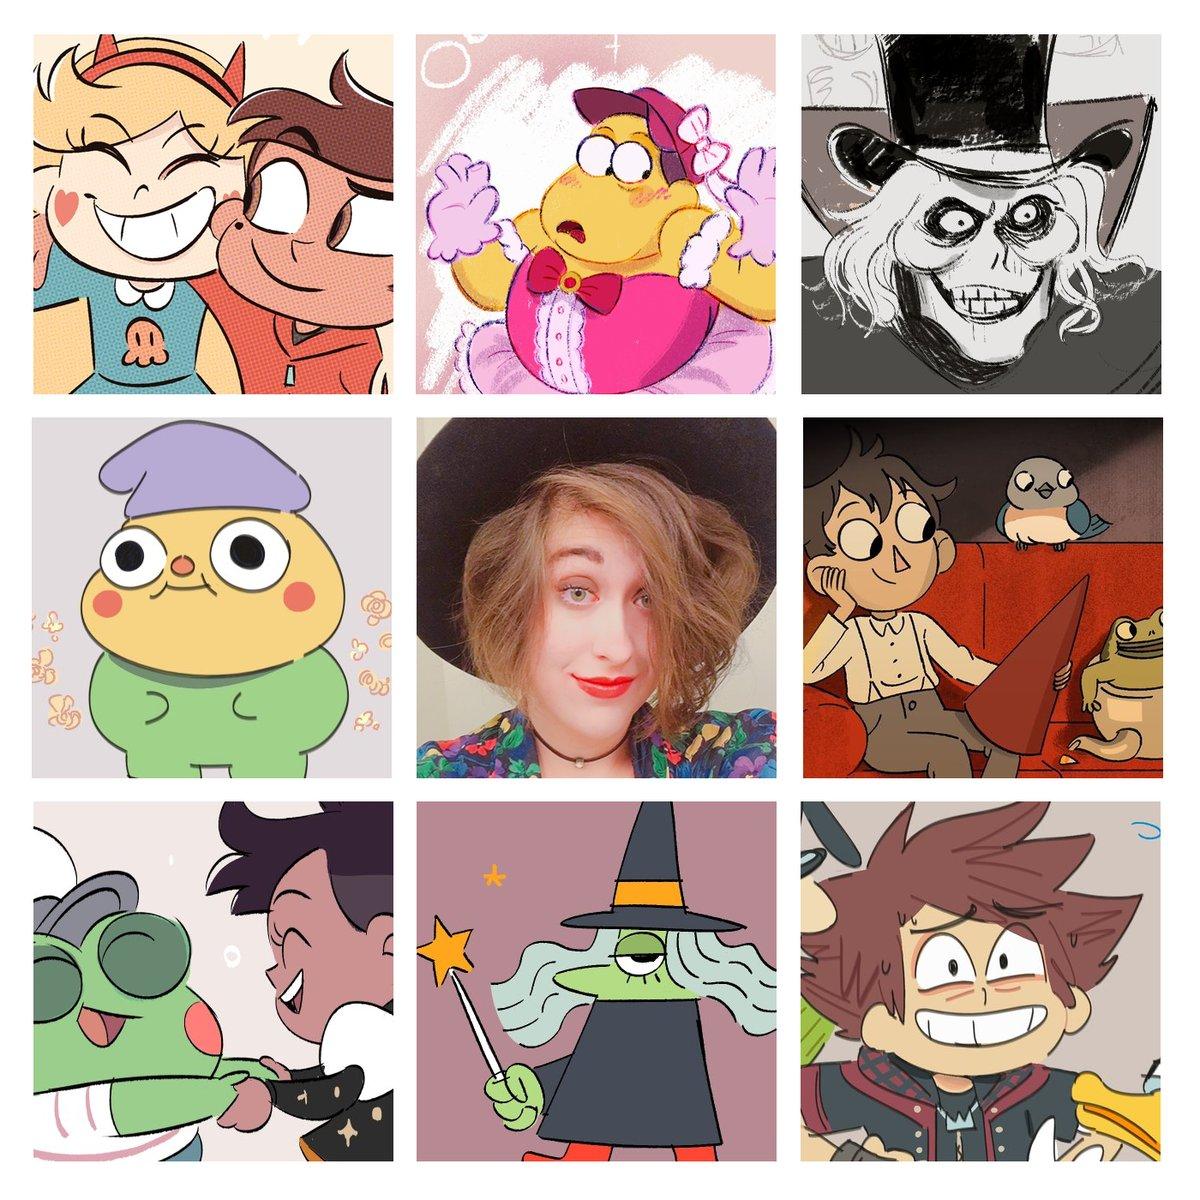 My name is Ariel (aka Hug_Bees), and I'm a storyboard artist at Disney TVA!

? https://t.co/3odQZYHUtH
? arielsvh@gmail.com
? https://t.co/Q1cVtcS5kH

#portfolioday #animation #storyboardartist #visiblewomen 